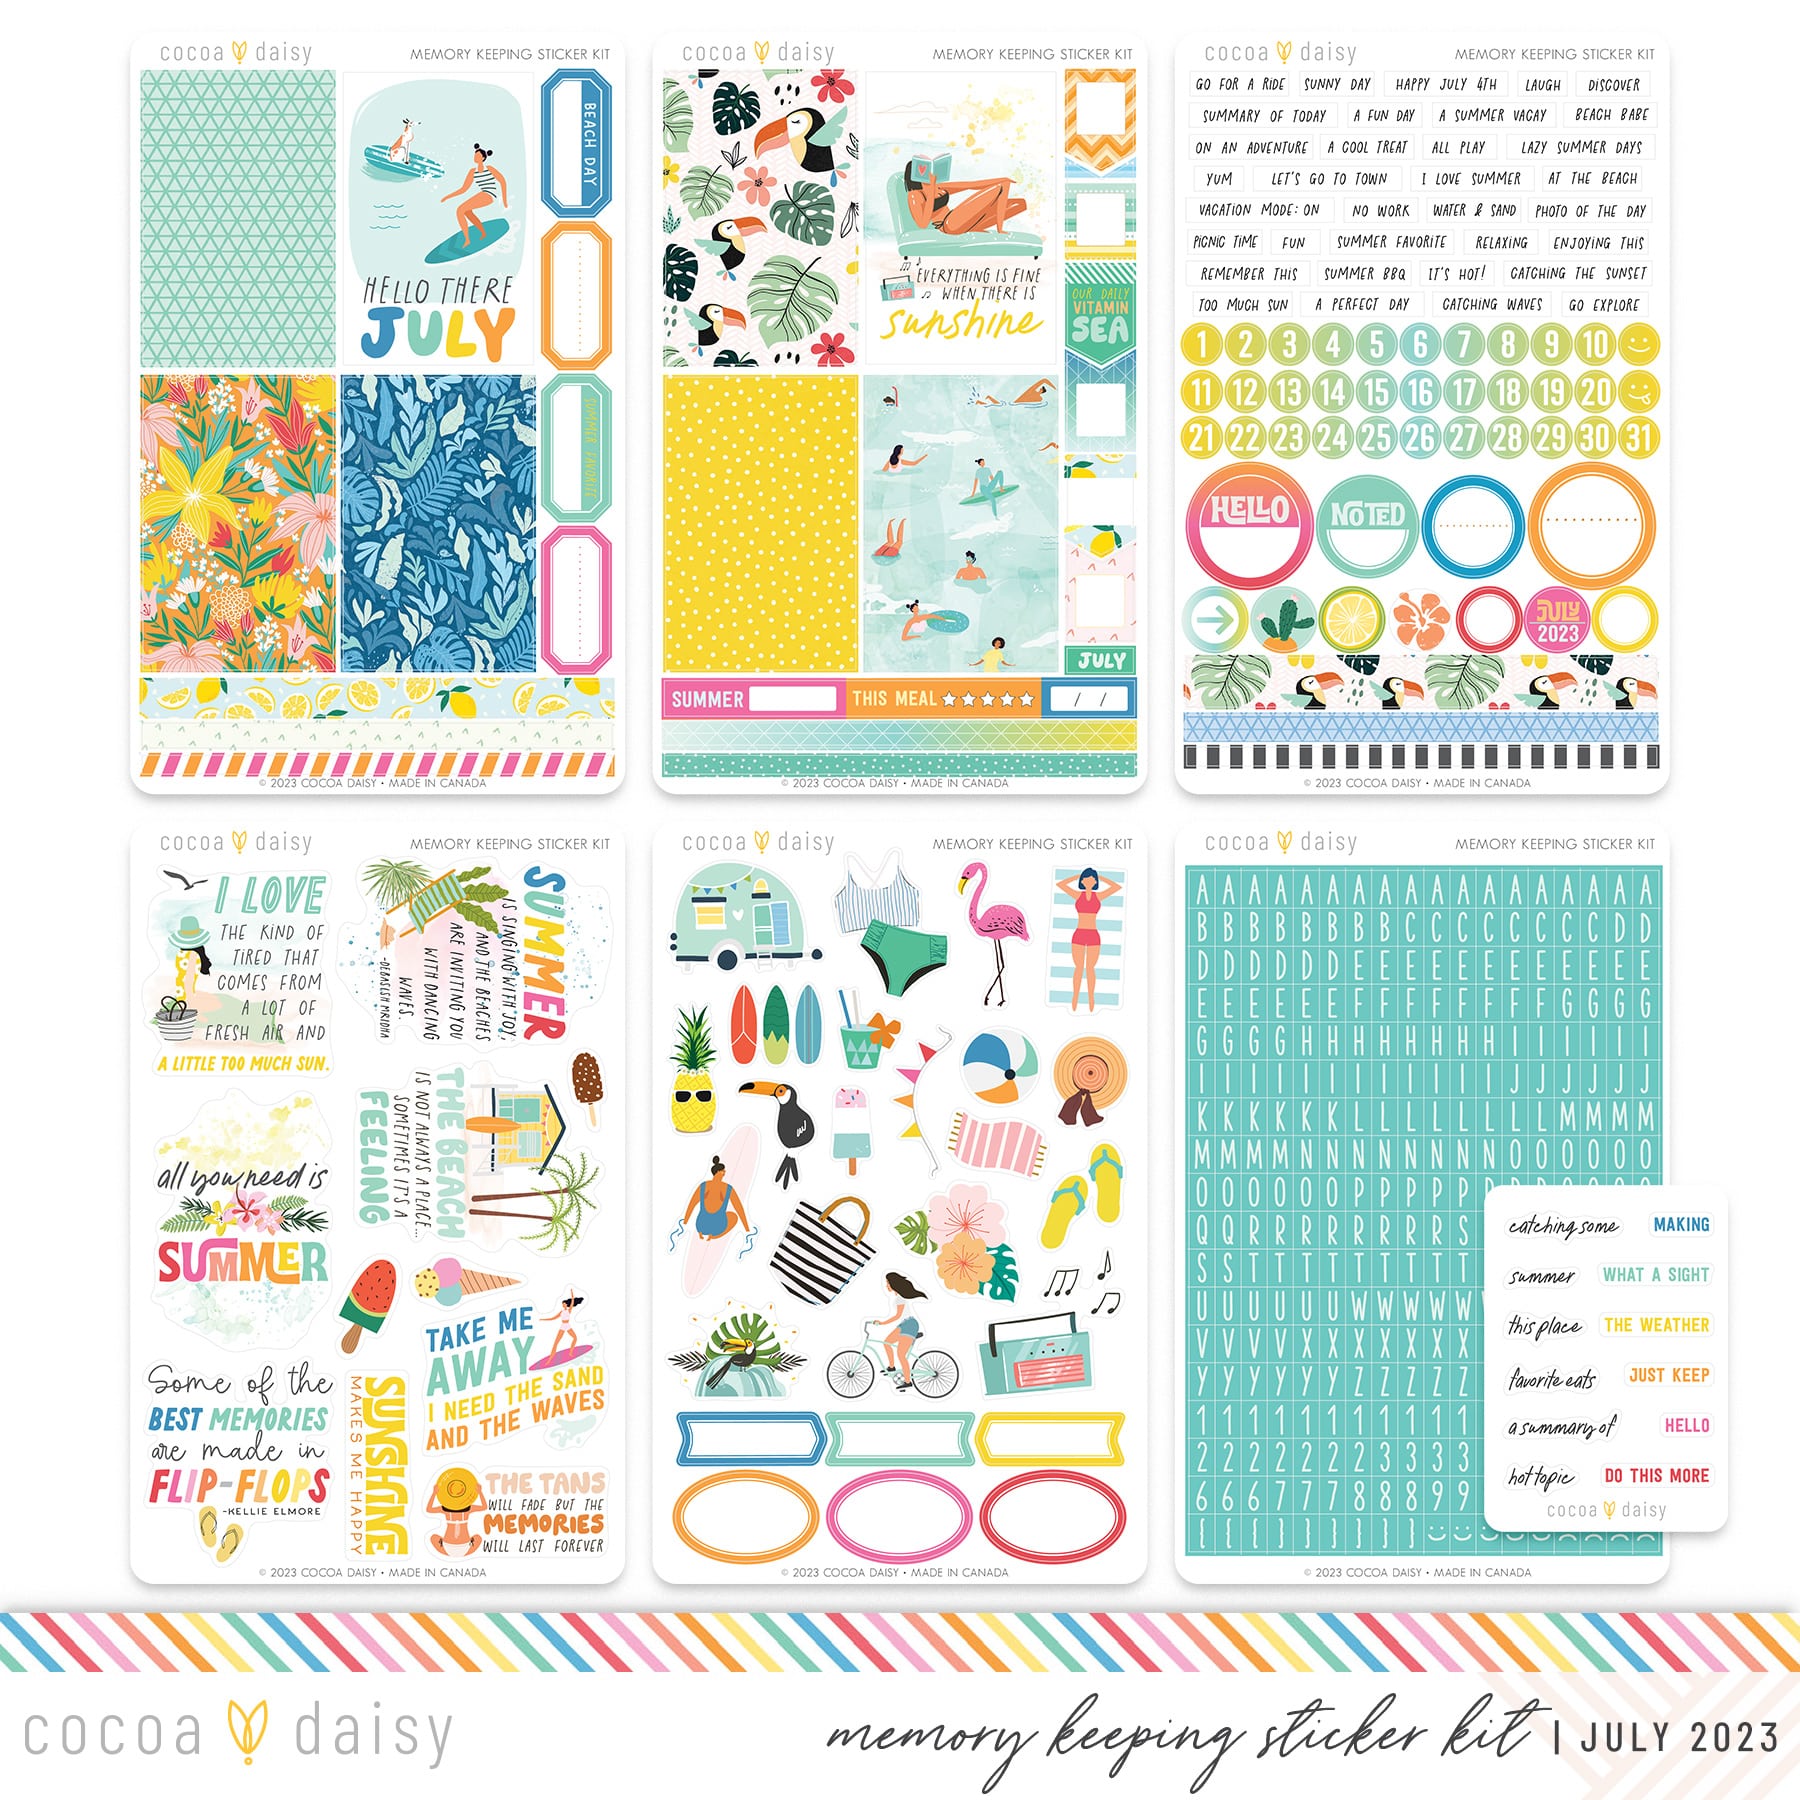 Daily Journal Days of the Week Planner Add On Sticker Sheet – Cocoa Daisy